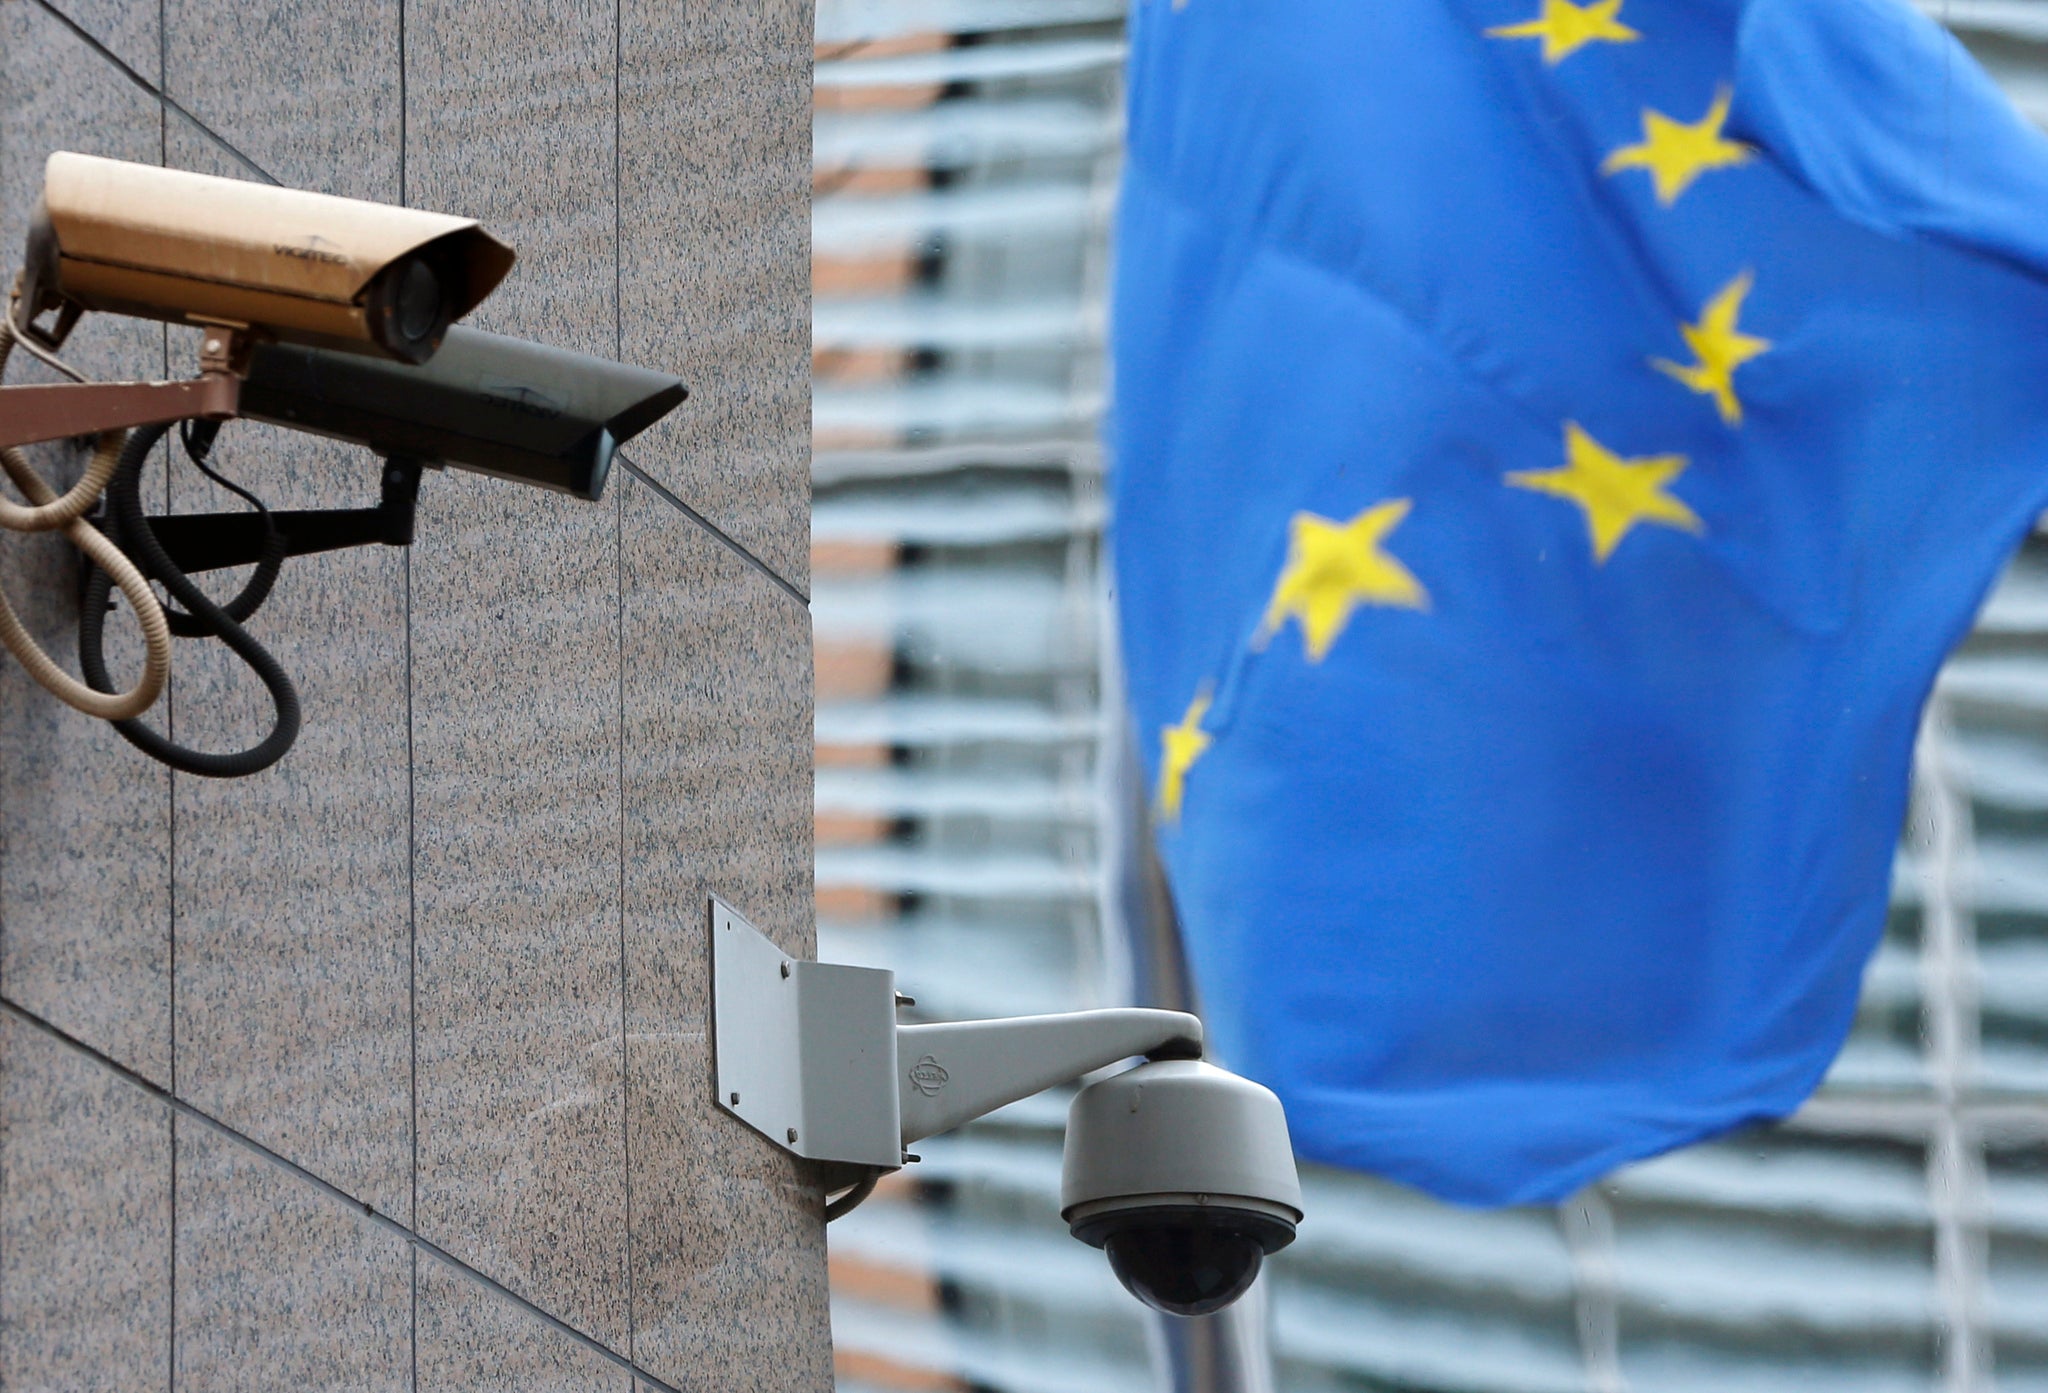 Security cameras are seen near the main entrance of the European Union Council building in Brussels July 1, 2013. The European Union said on Monday it had ordered a security sweep of EU buildings after reports that a U.S. spy agency had bugged EU offices